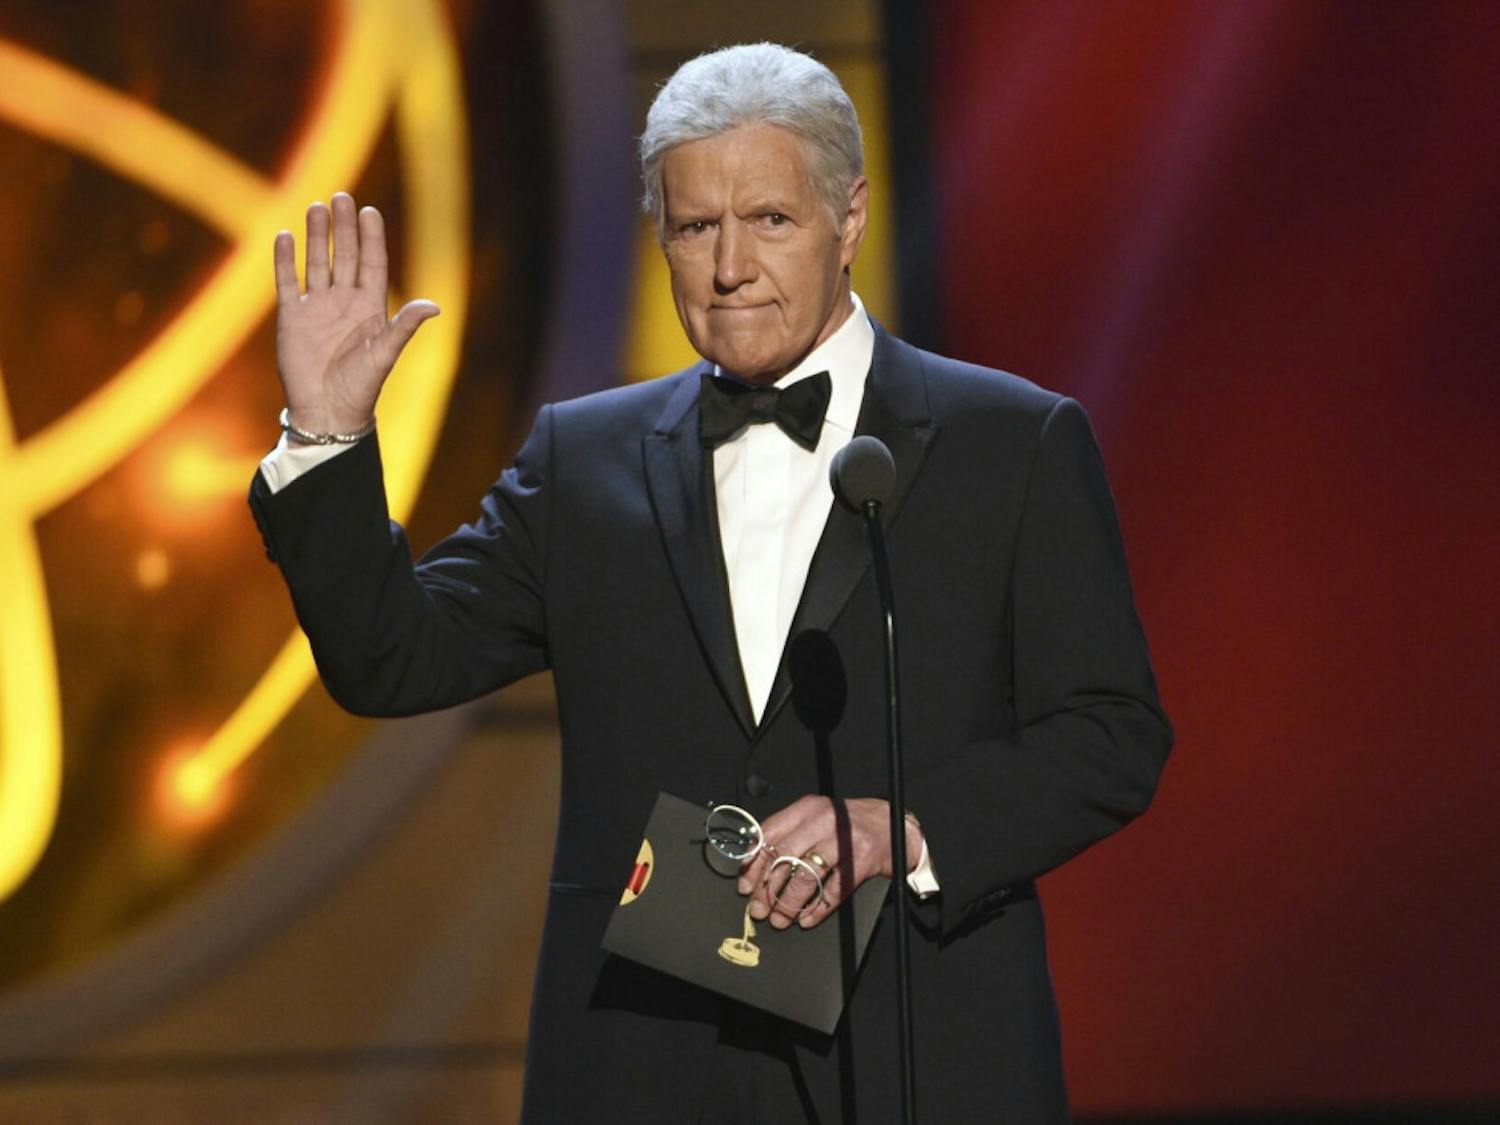 This May 5, 2019, file photo shows Alex Trebek gestures while presenting an award at the 46th annual Daytime Emmy Awards in Pasadena, Calif. Jeopardy!” host Alex Trebek died Sunday, Nov. 8, 2020, after battling pancreatic cancer for nearly two years. Trebek died at home with family and friends surrounding him, “Jeopardy!” studio Sony said in a statement. Trebek presided over the beloved quiz show for more than 30 years.